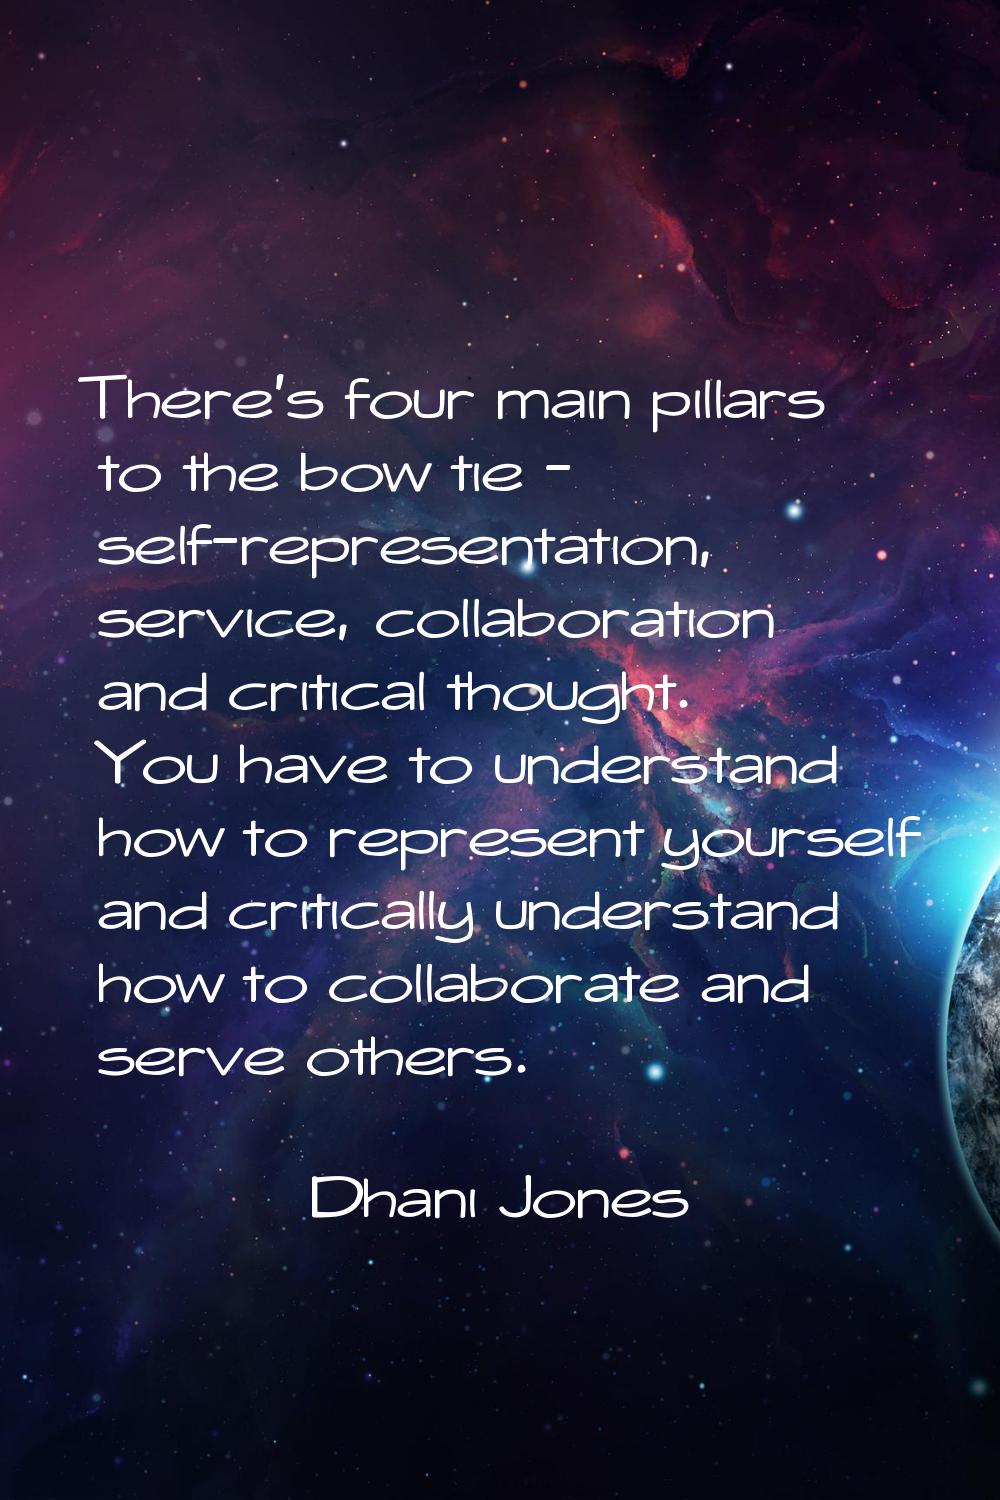 There's four main pillars to the bow tie - self-representation, service, collaboration and critical